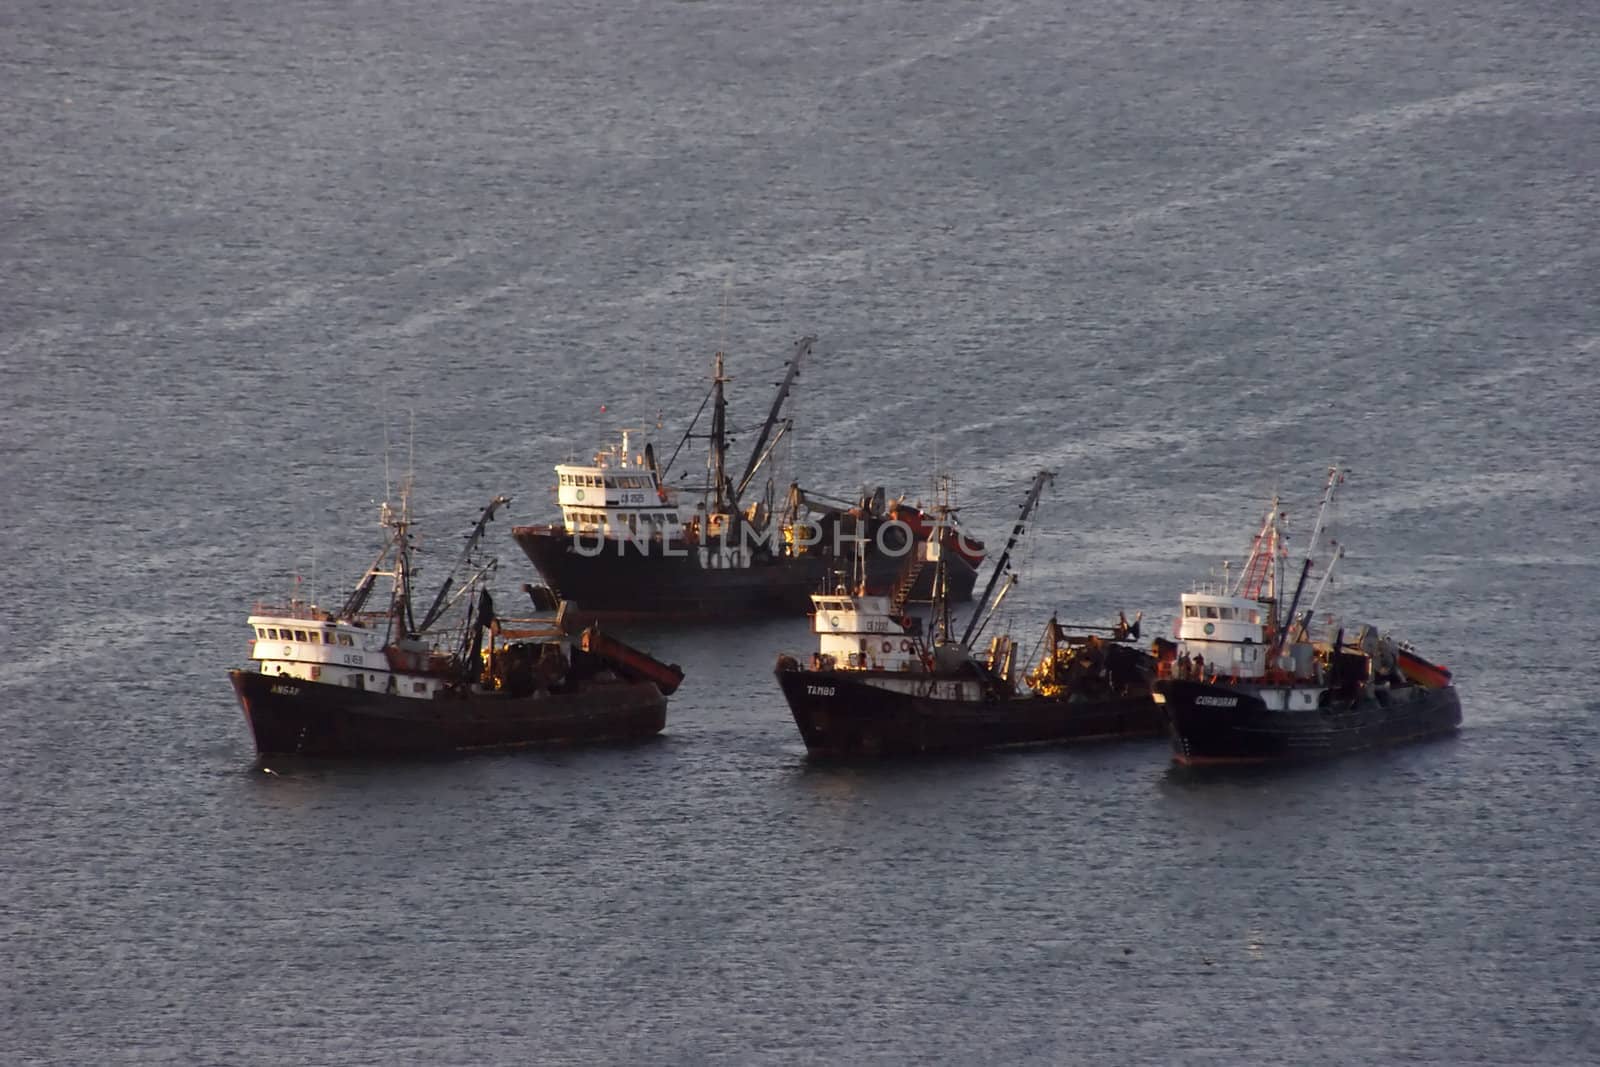 Group of trawlers in the ocean by azotov